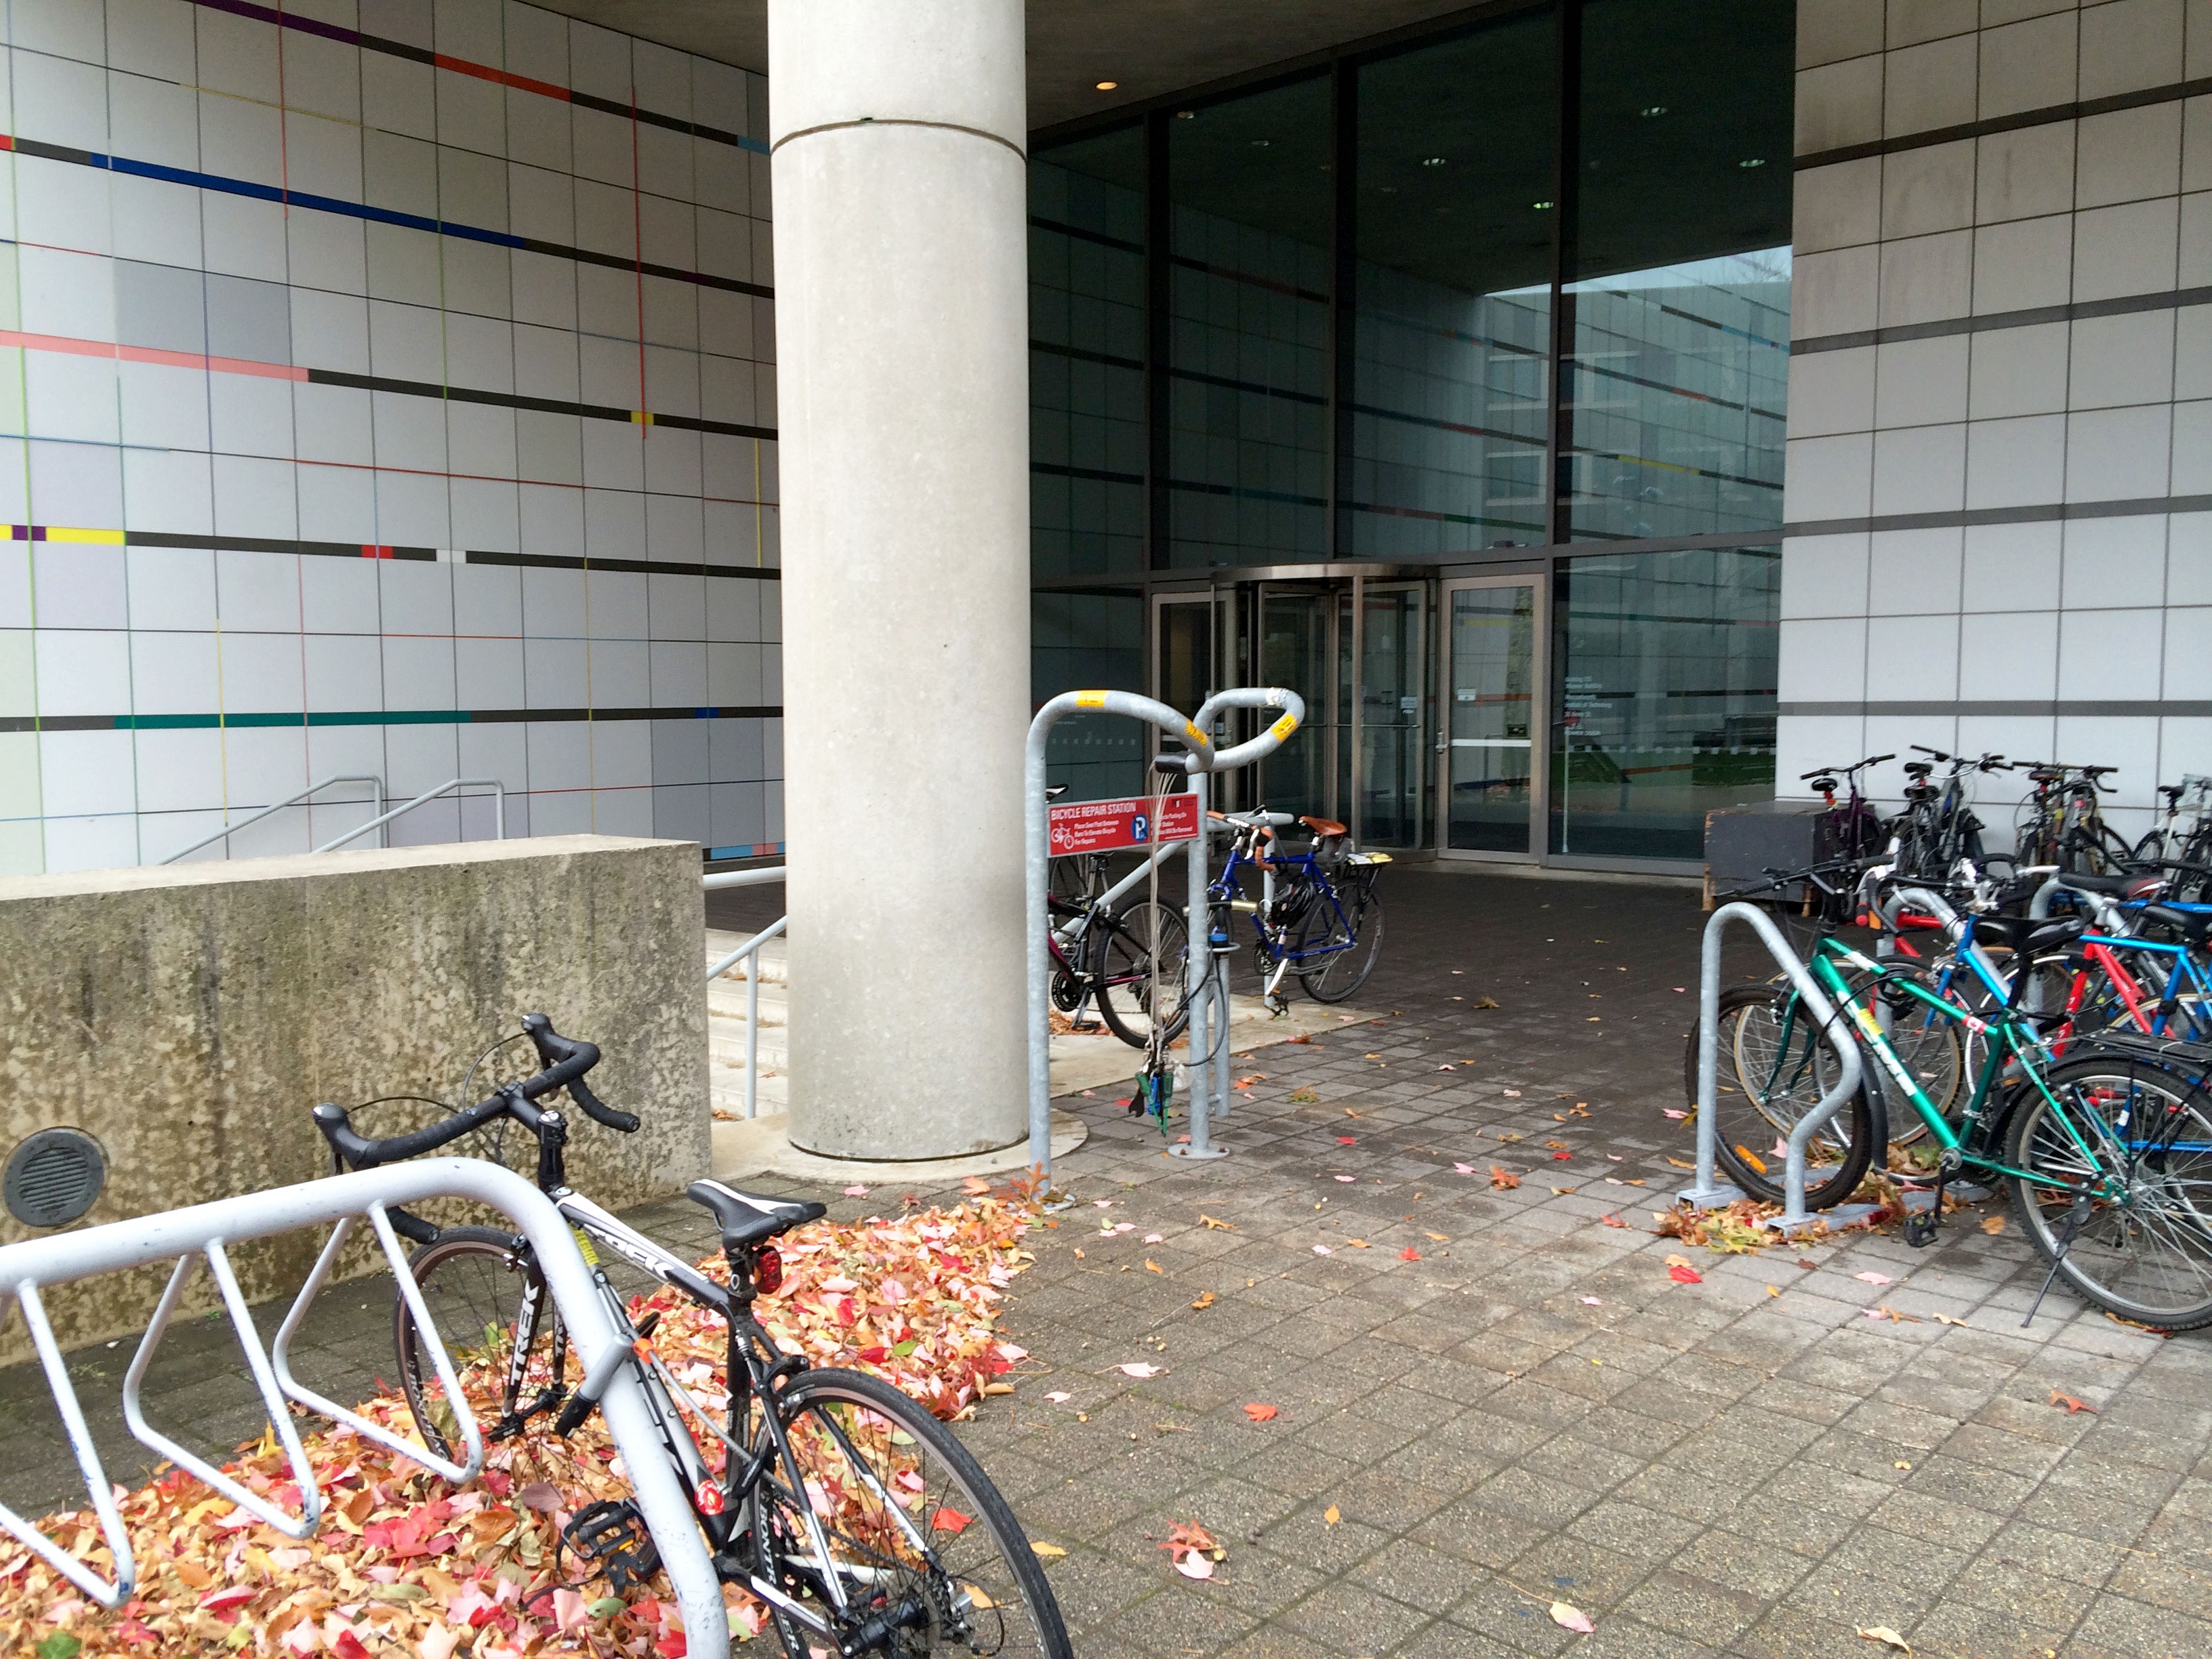 <p>View of the East entrance from the East campus, showing bicycles and bicycle repair station</p>